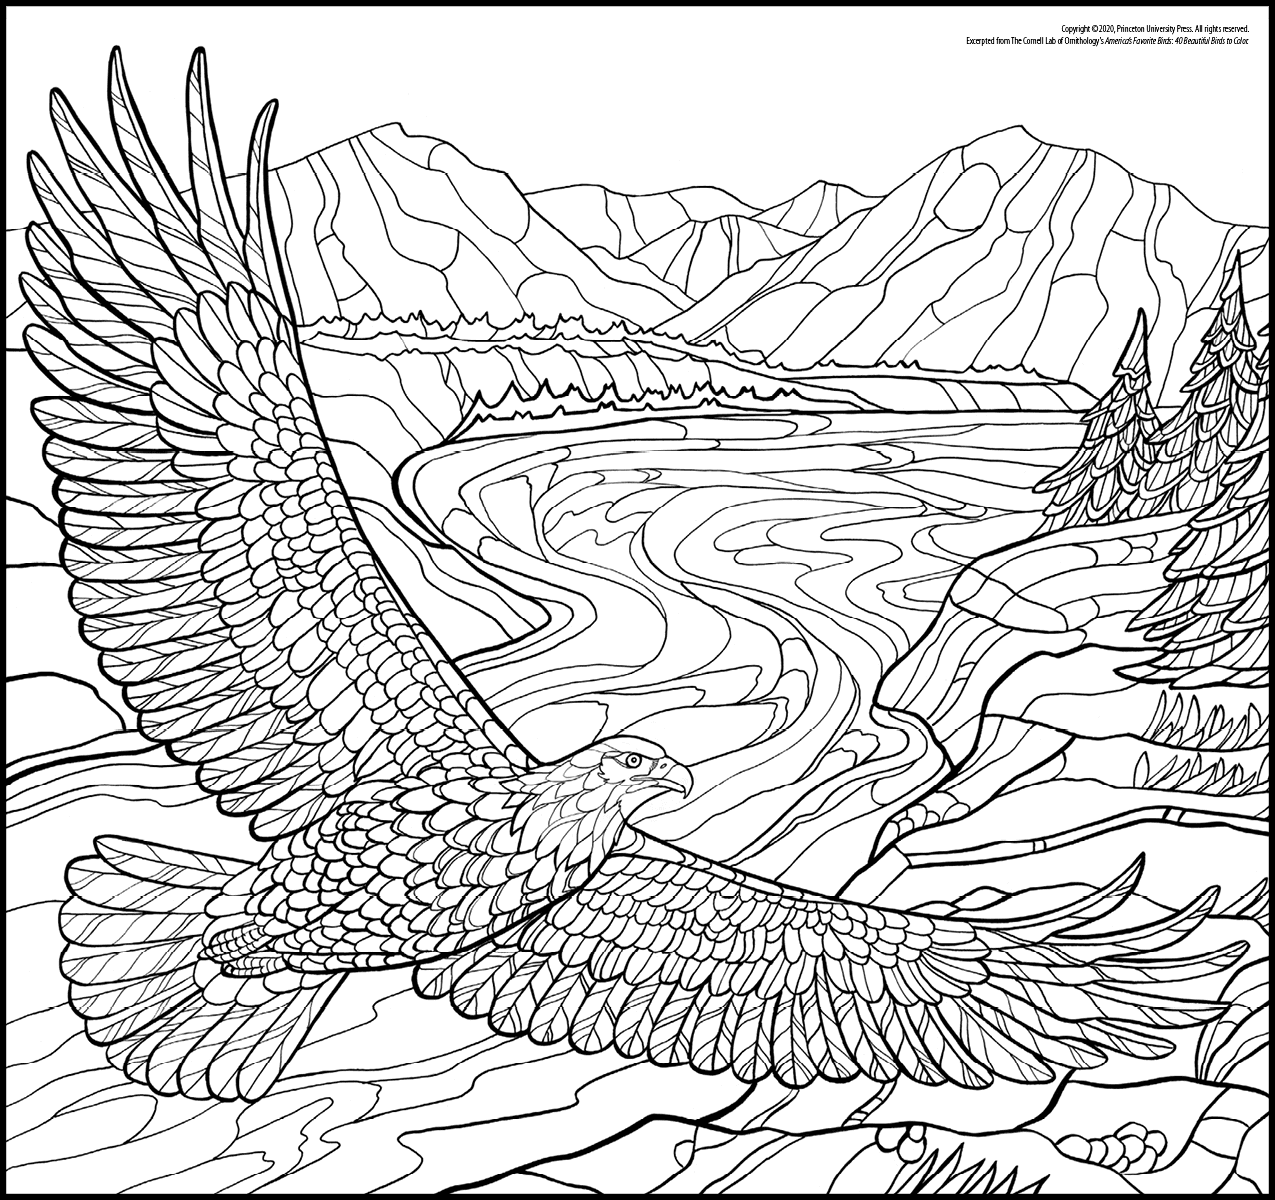 Coloring page free downloads â cornell lab publishing group